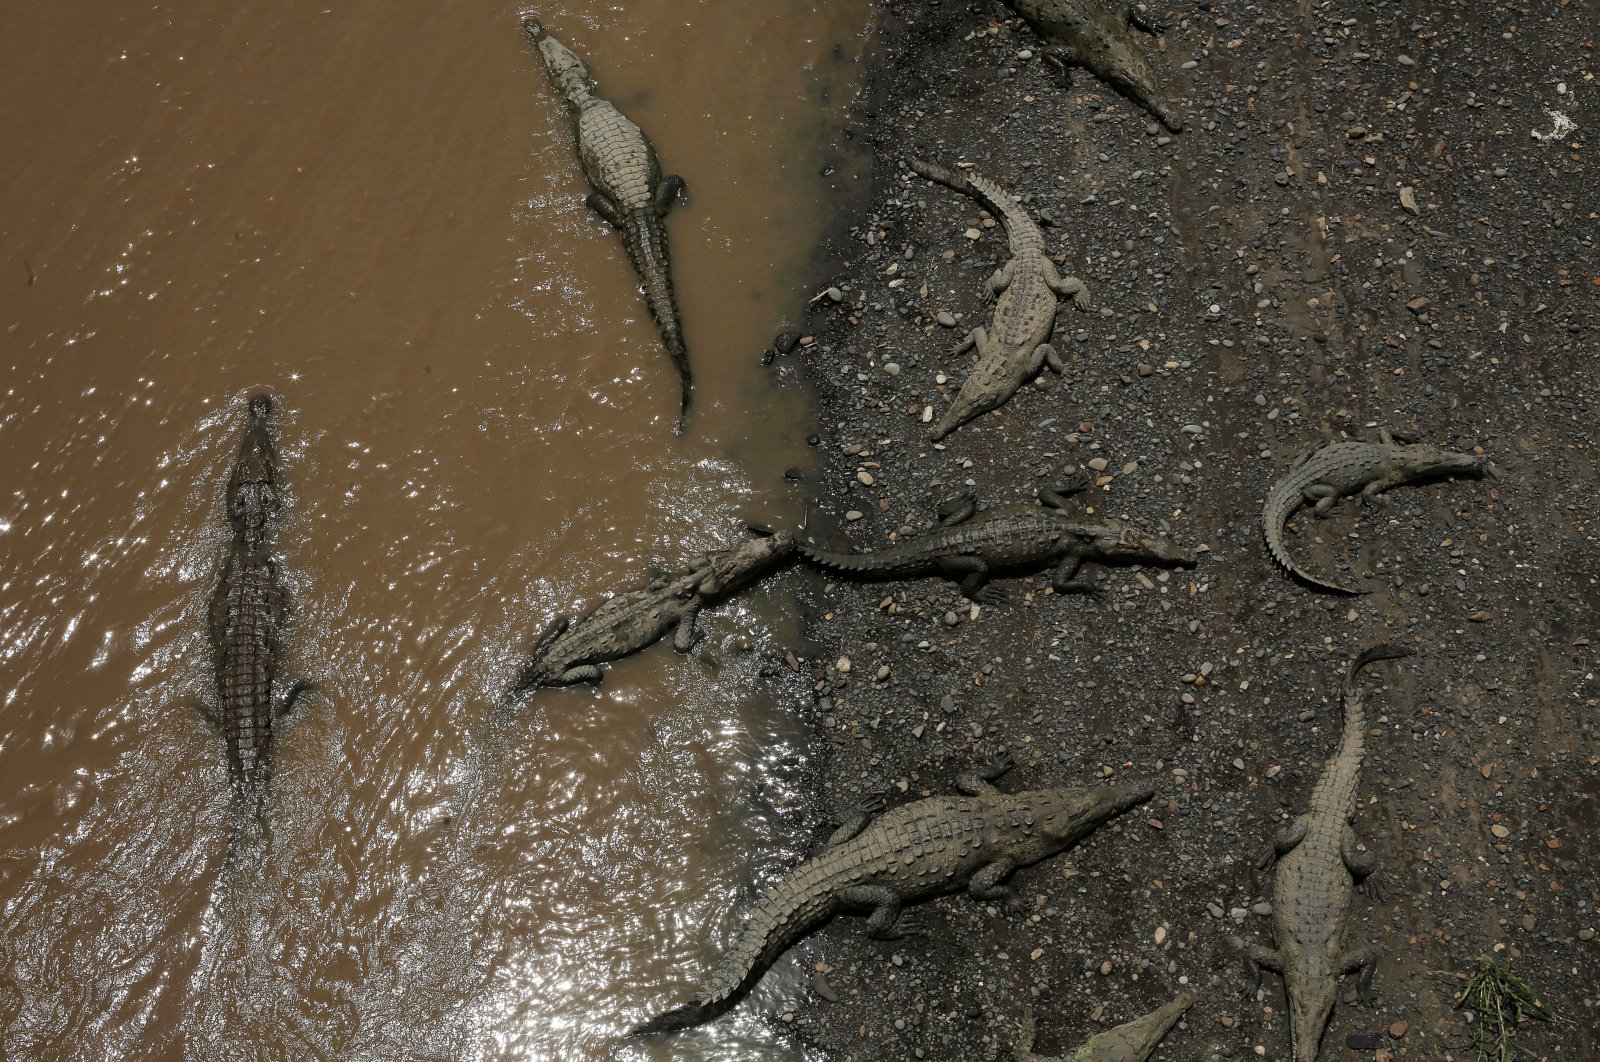 Large crocodiles are seen in the Tarcoles River, a river with one of the highest crocodile populations in the world, in Tarcoles, province of Puntarenas, Costa Rica, July 16, 2019. (Reuters Photo)